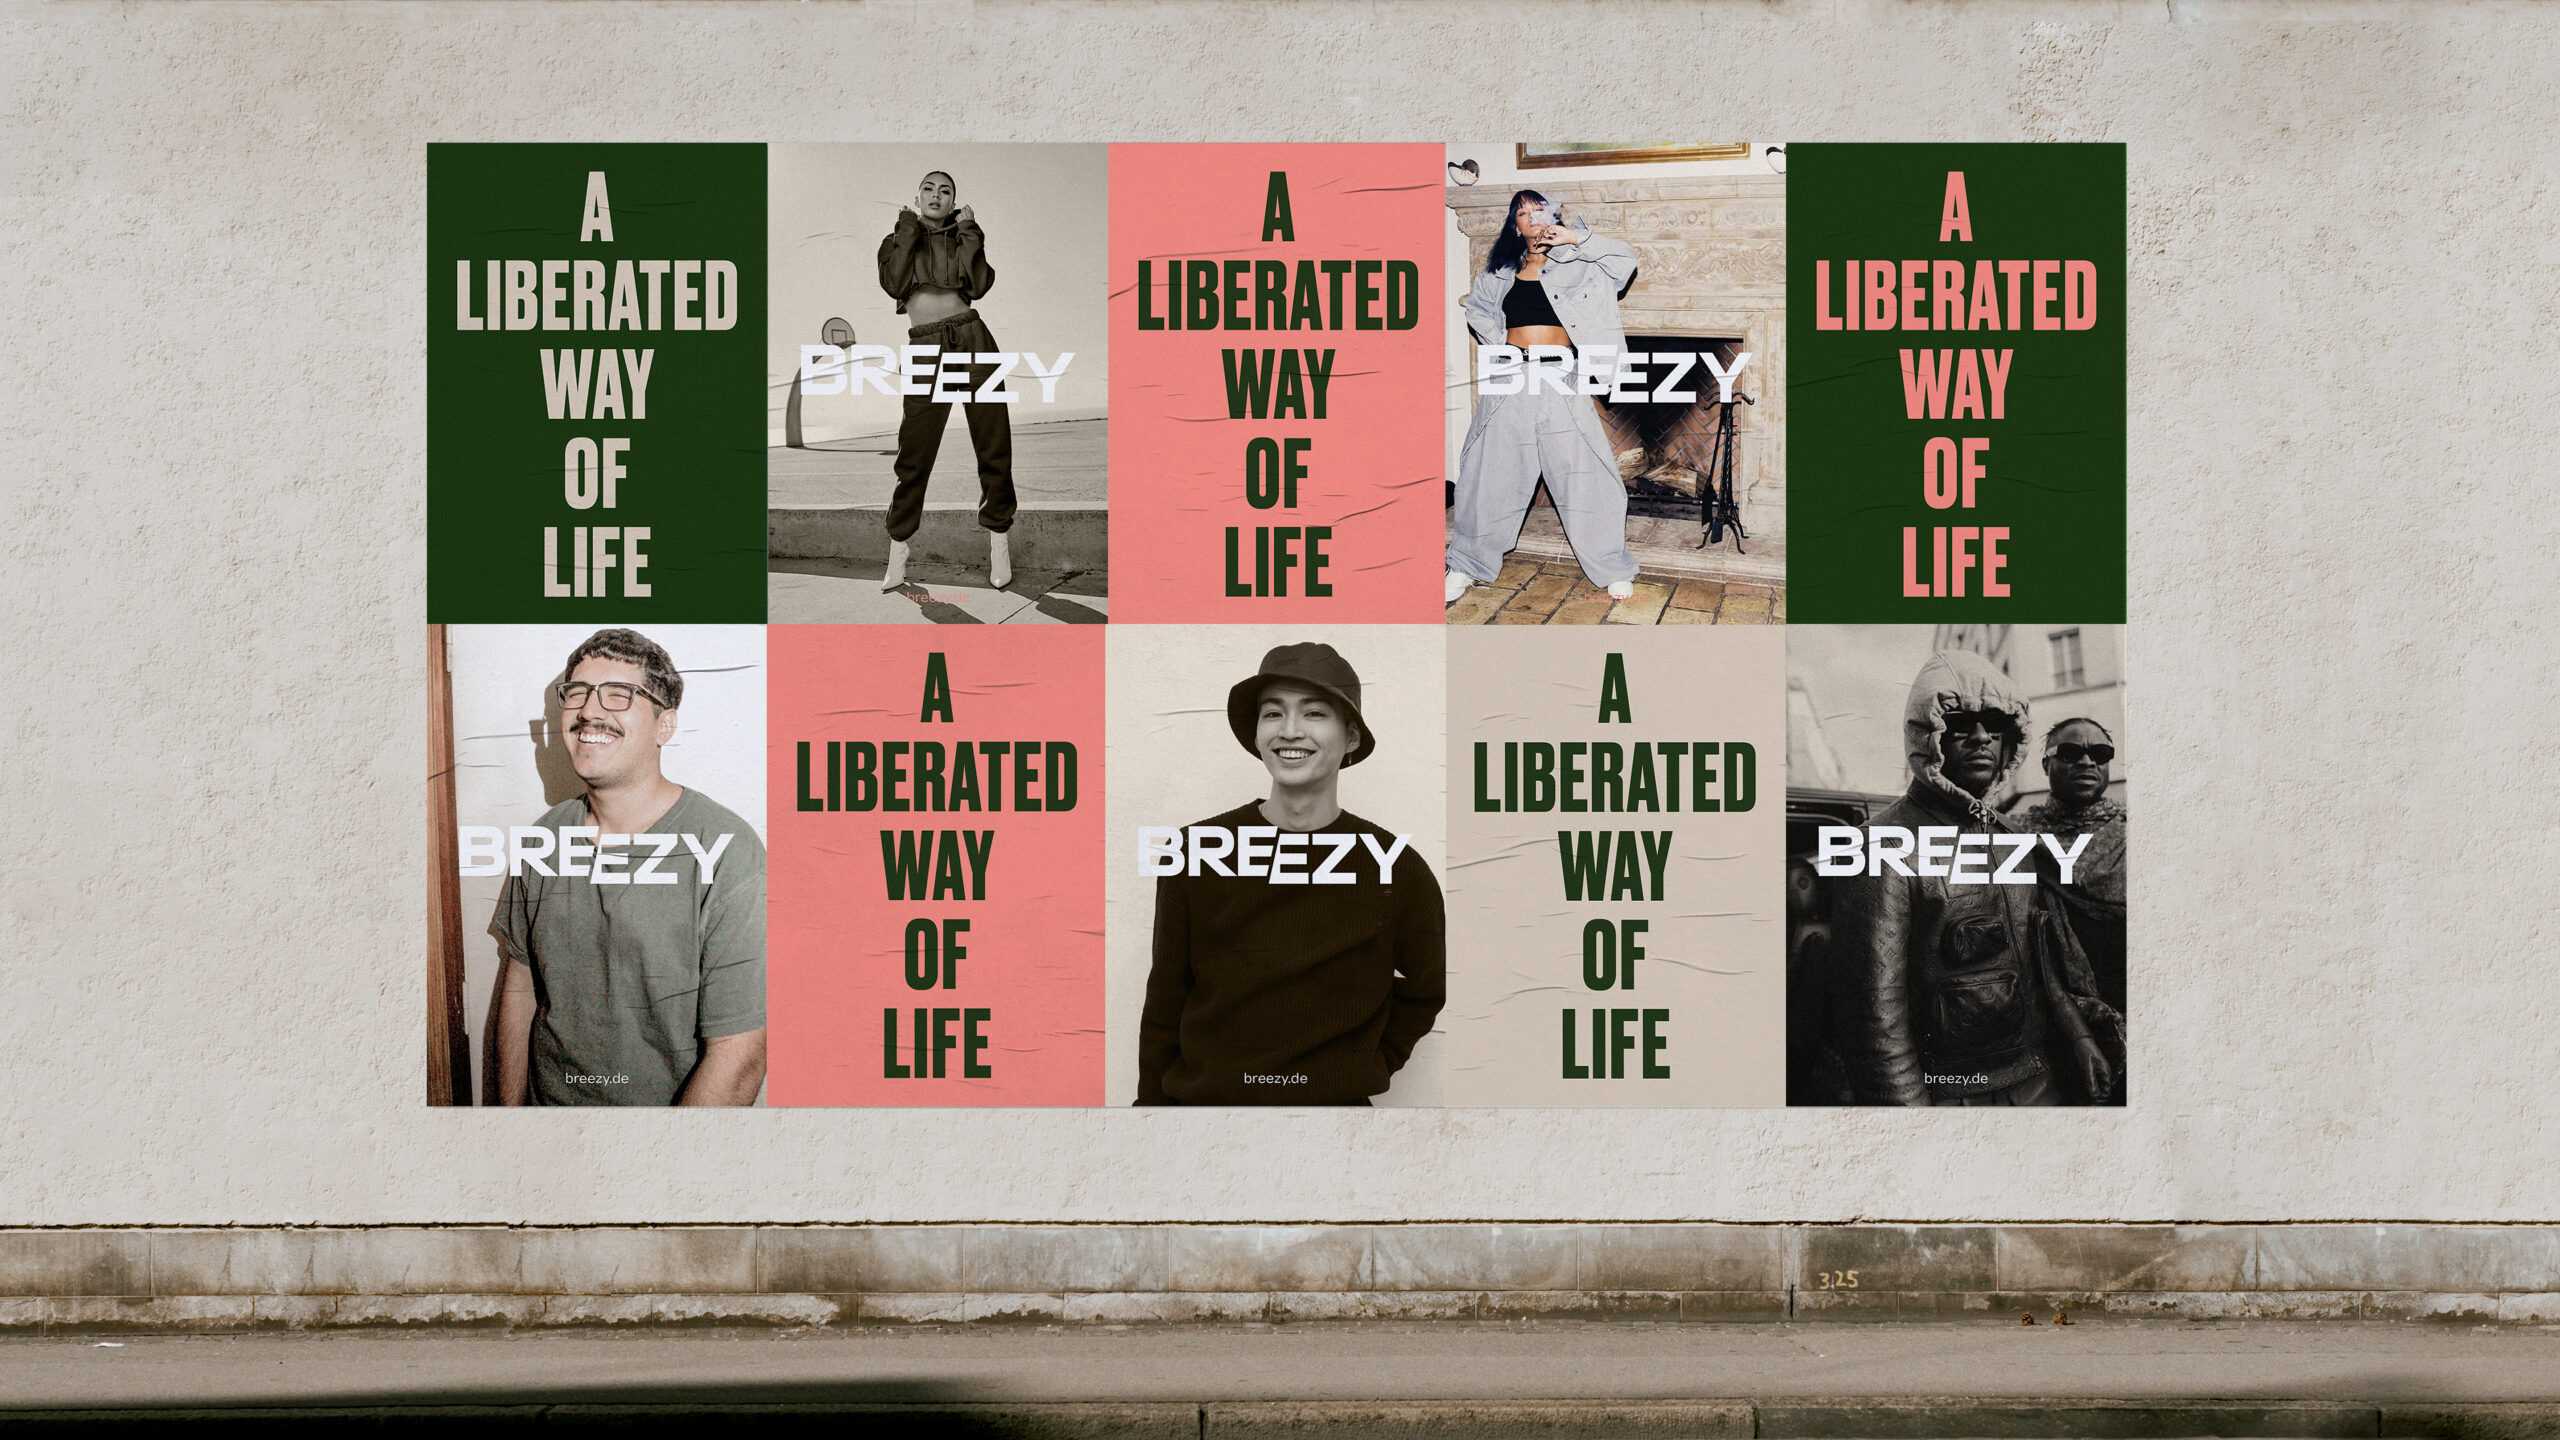 posterwall with posters for Breezy